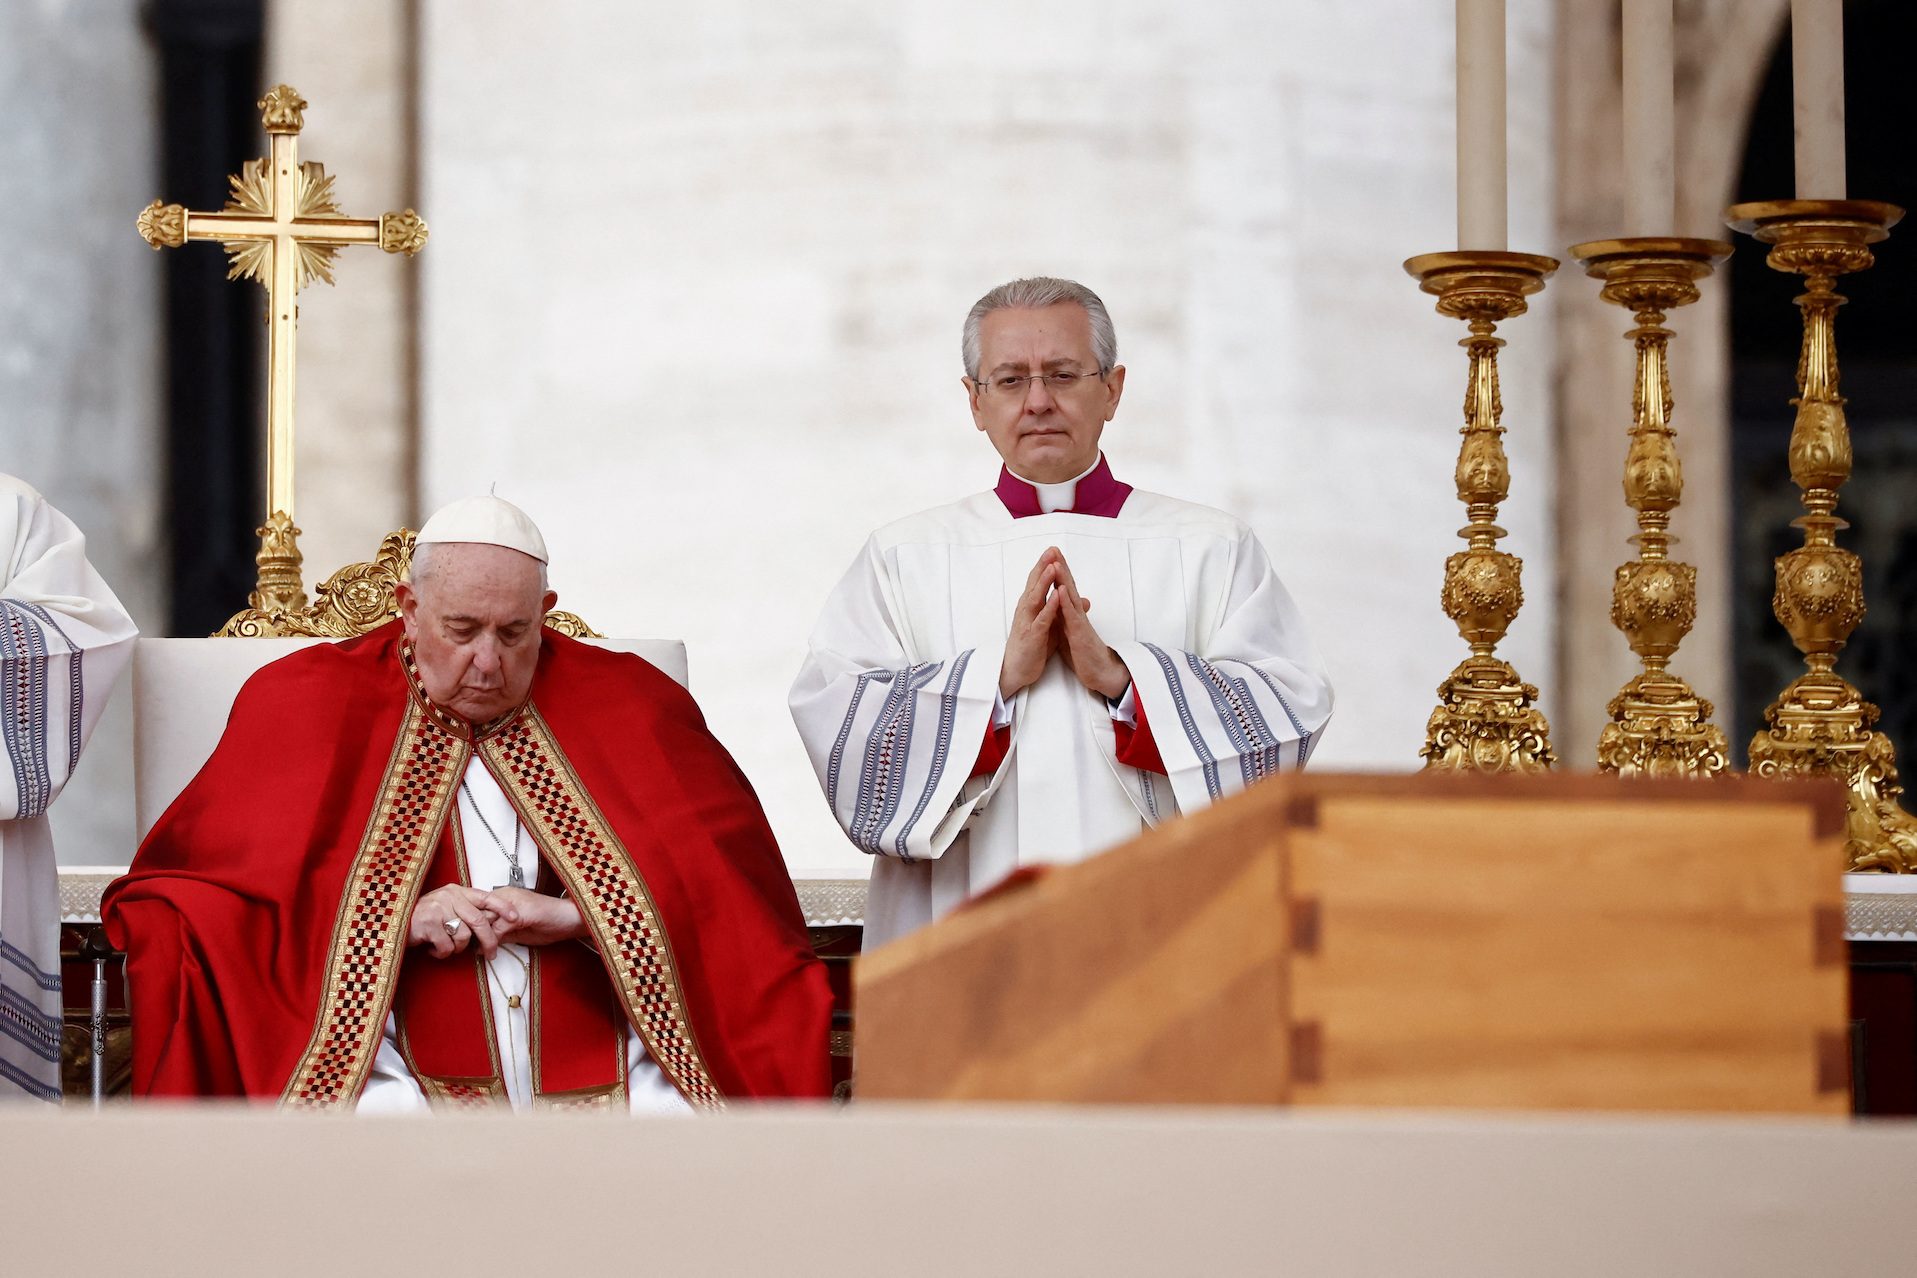 Pope Francis leads Catholics in bidding farewell to ex Pope Benedict